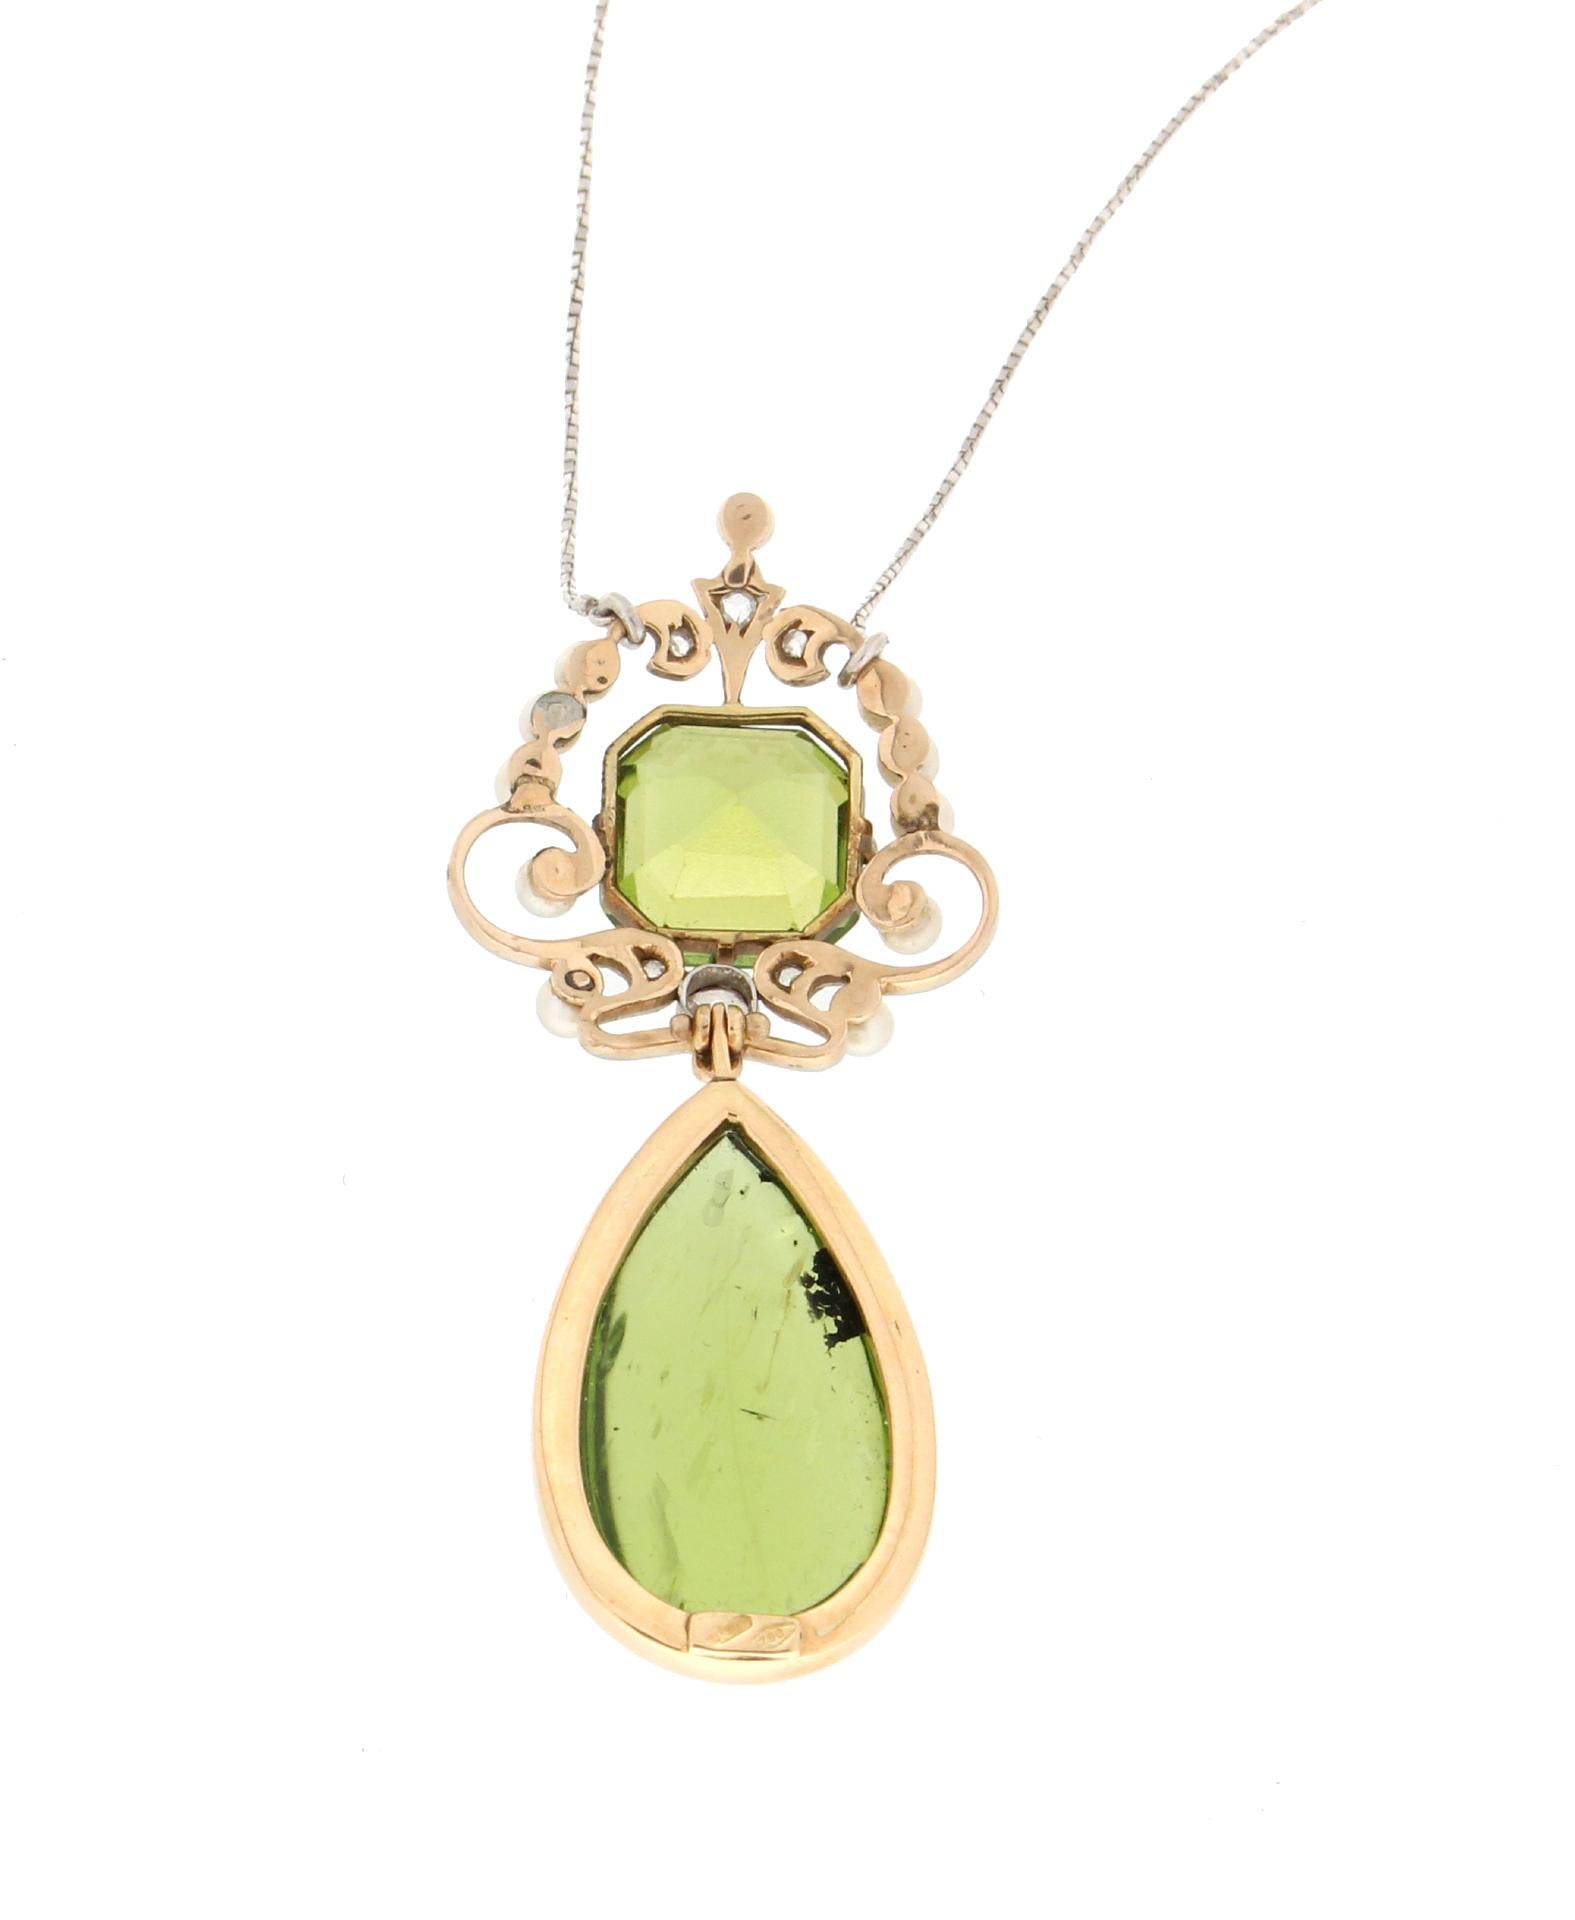 Handcraft Peridot 18 Karat Yellow Gold Diamonds Pearls Pendant Necklace In Excellent Condition For Sale In Marcianise, IT